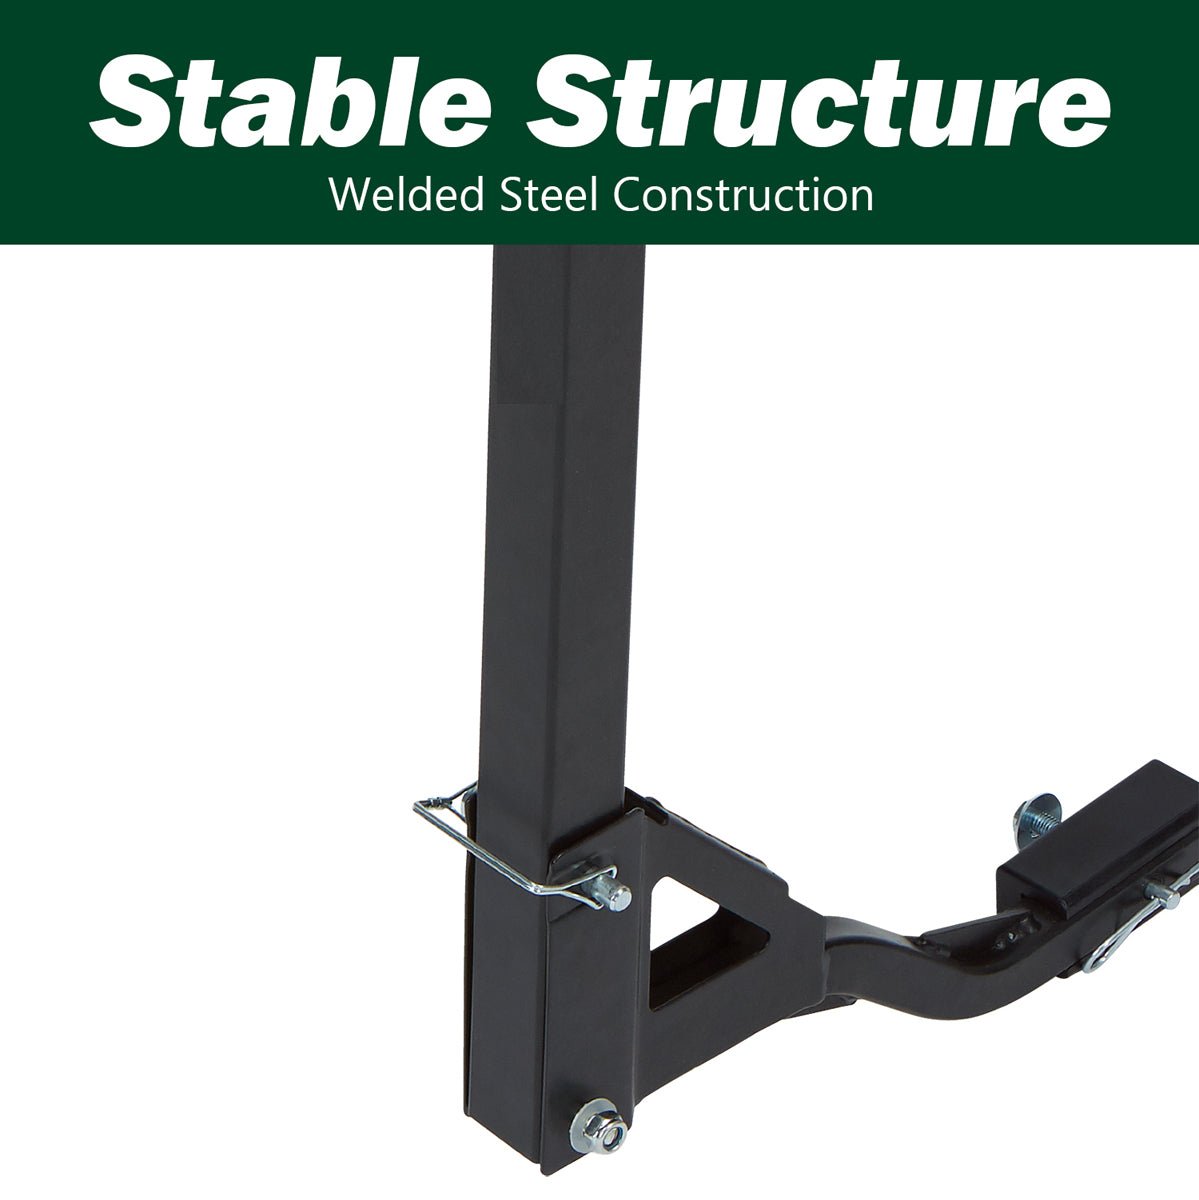 Stable Structure Welded Steel Construction